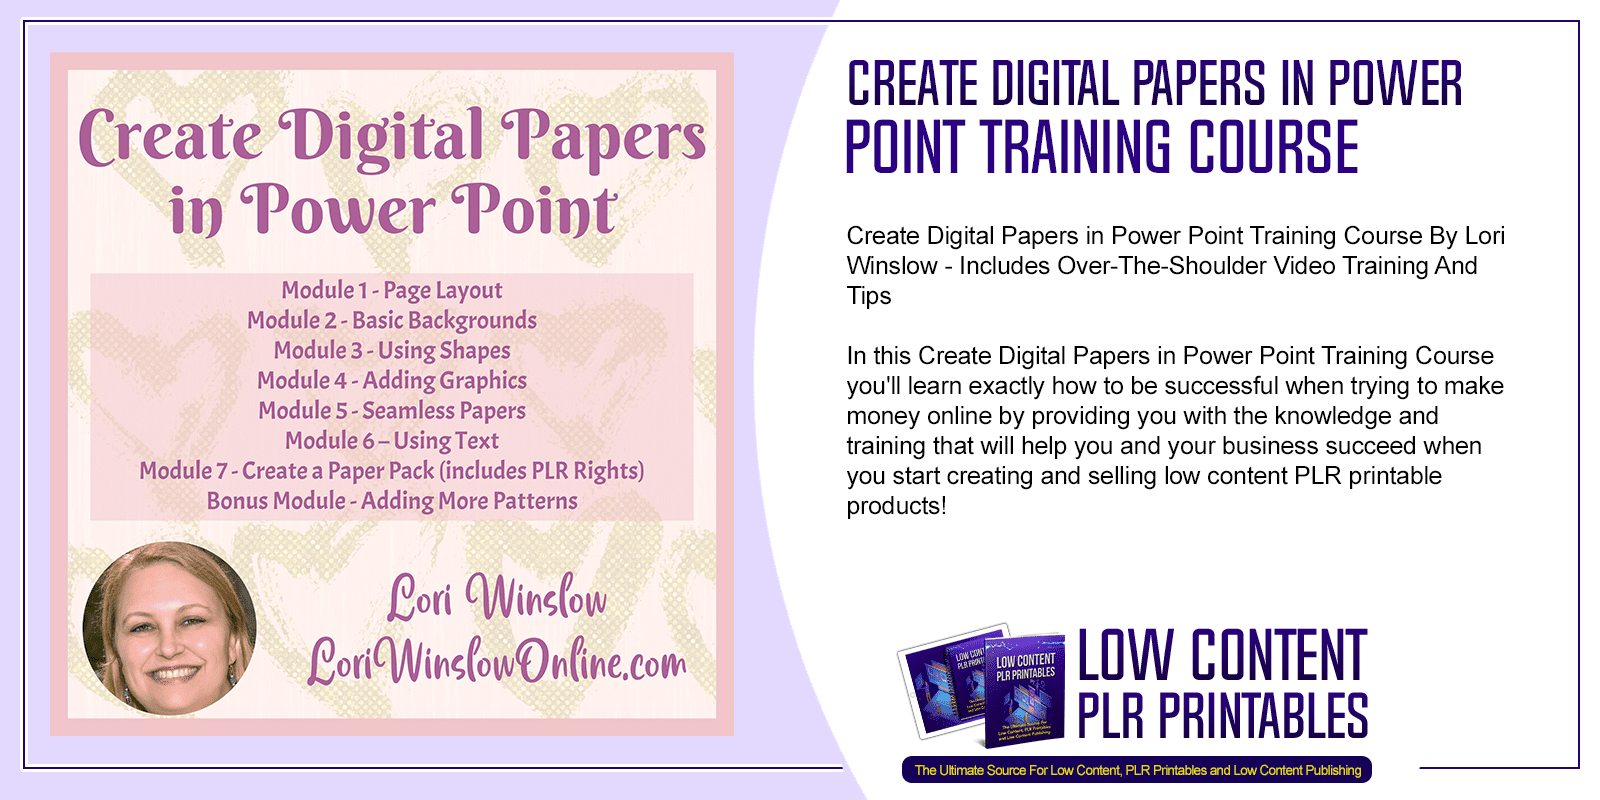 Create Digital Papers in Power Point Training Course